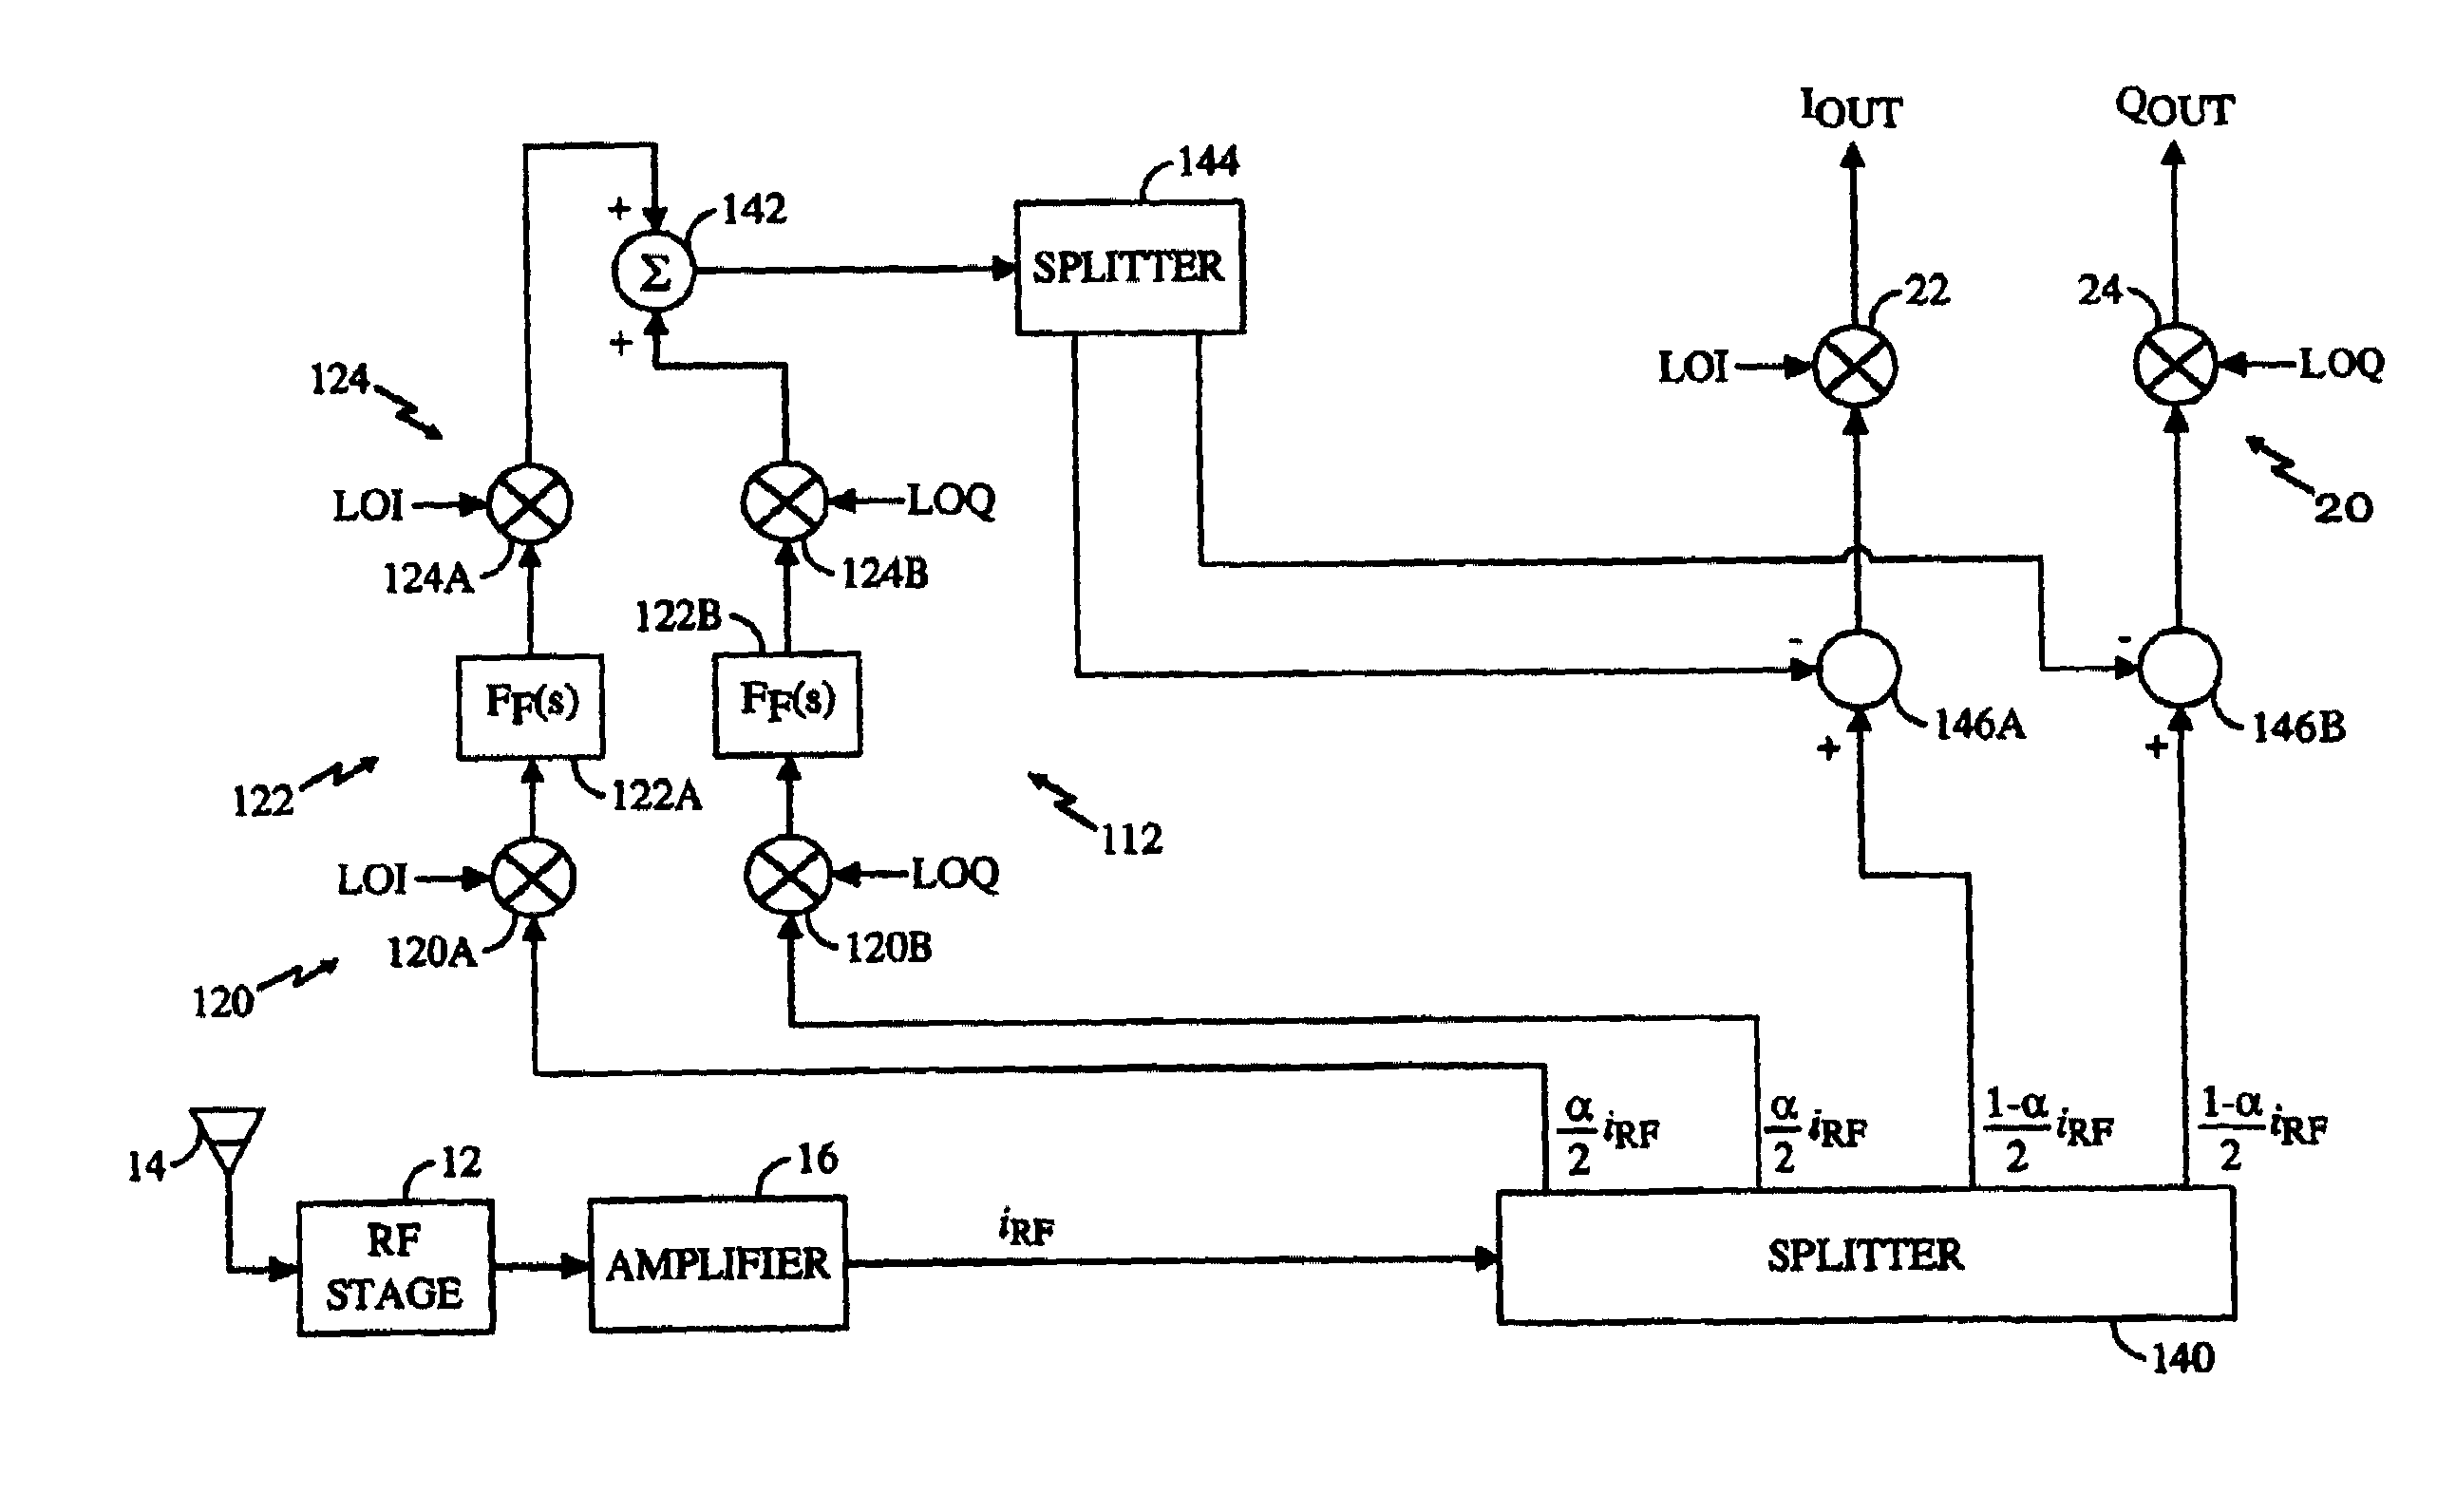 Distortion reduction in a wireless communication device